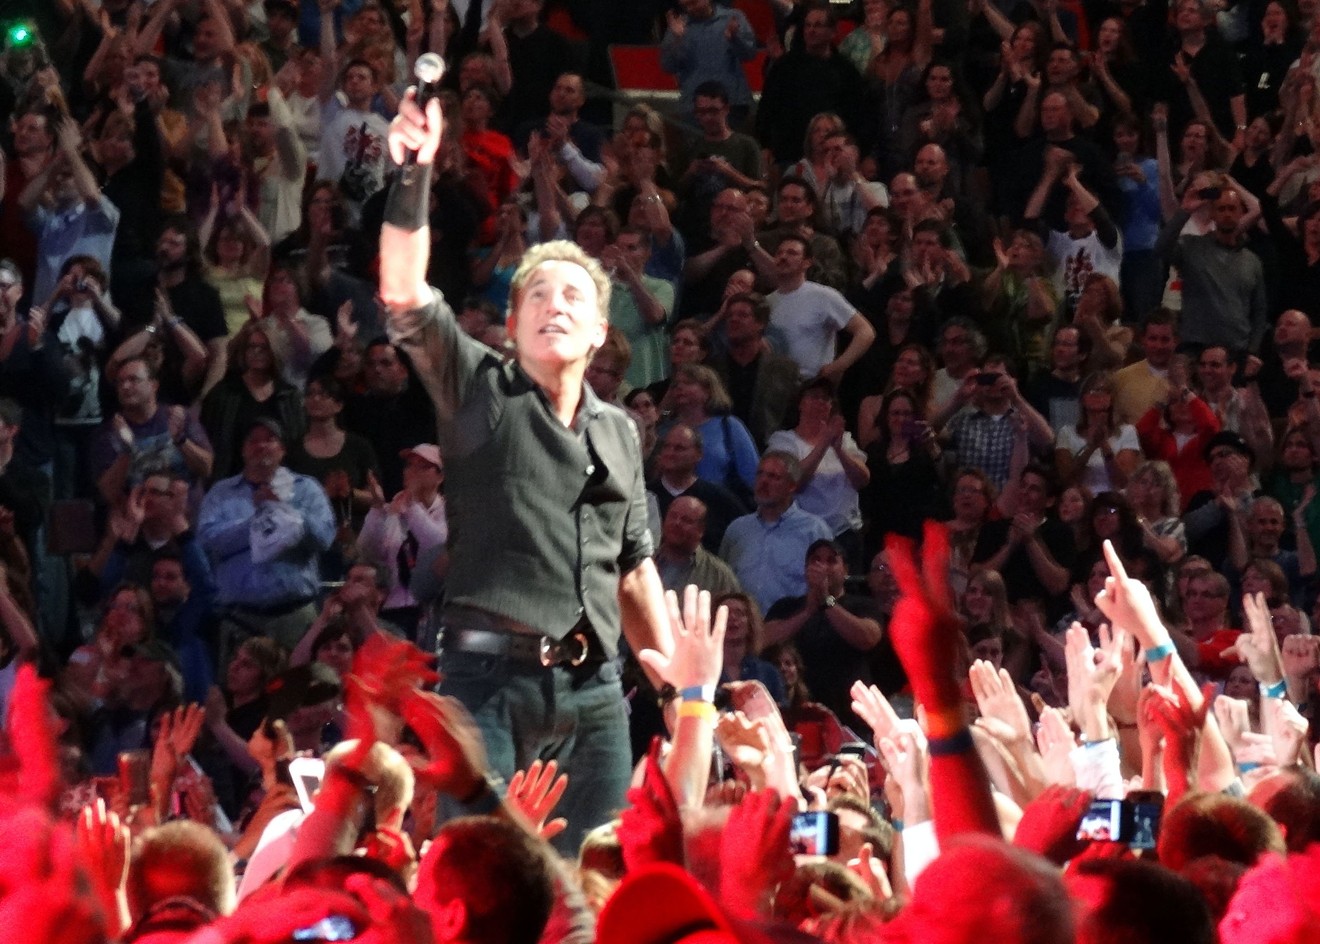 Bruce Springsteen and the E Street Band are back on the road, with a show at Toyota Center on Tuesday.  Concerts from Anthrax, Eric Johnson, Jim Lauderdale, Bill Kirchen, and Adam Sandler are also on tap this week.